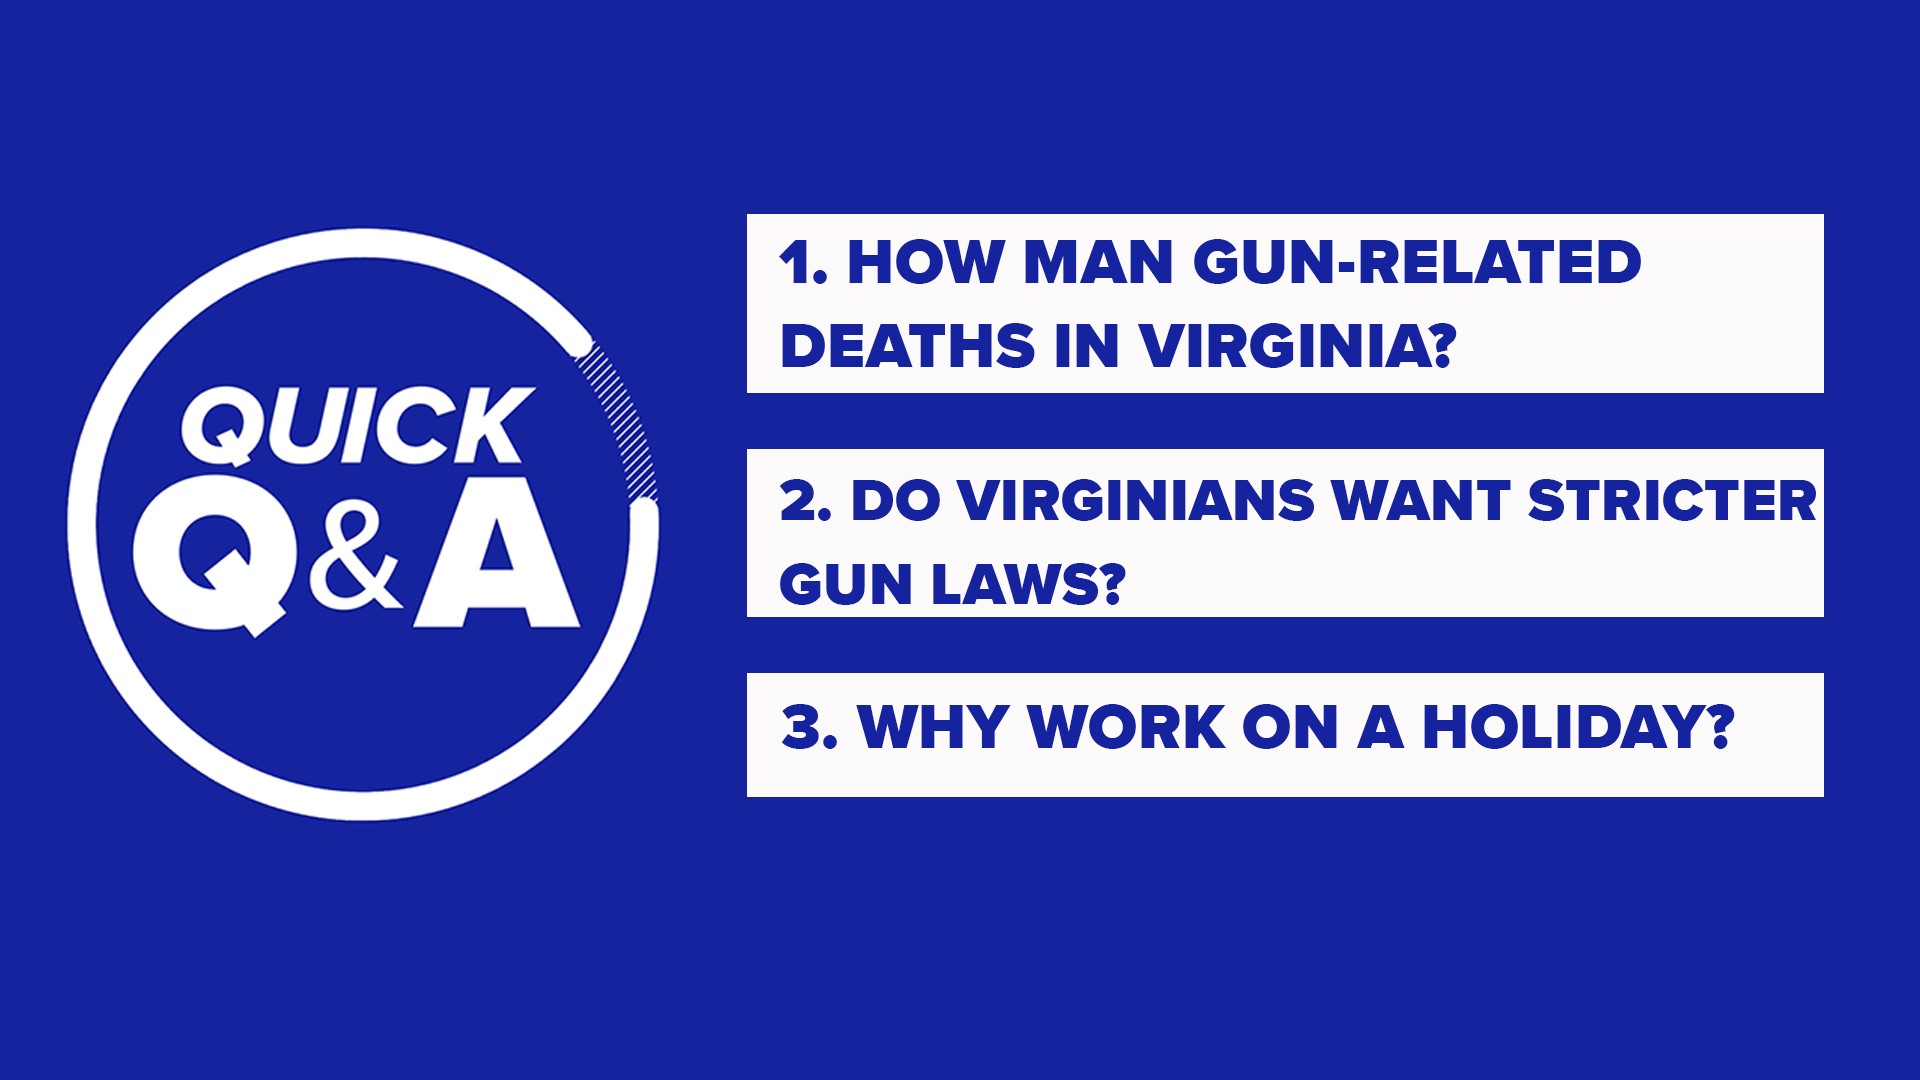 Got questions about Virginia's gun laws and why some people work on a holiday? We've got the answers for you...quickly